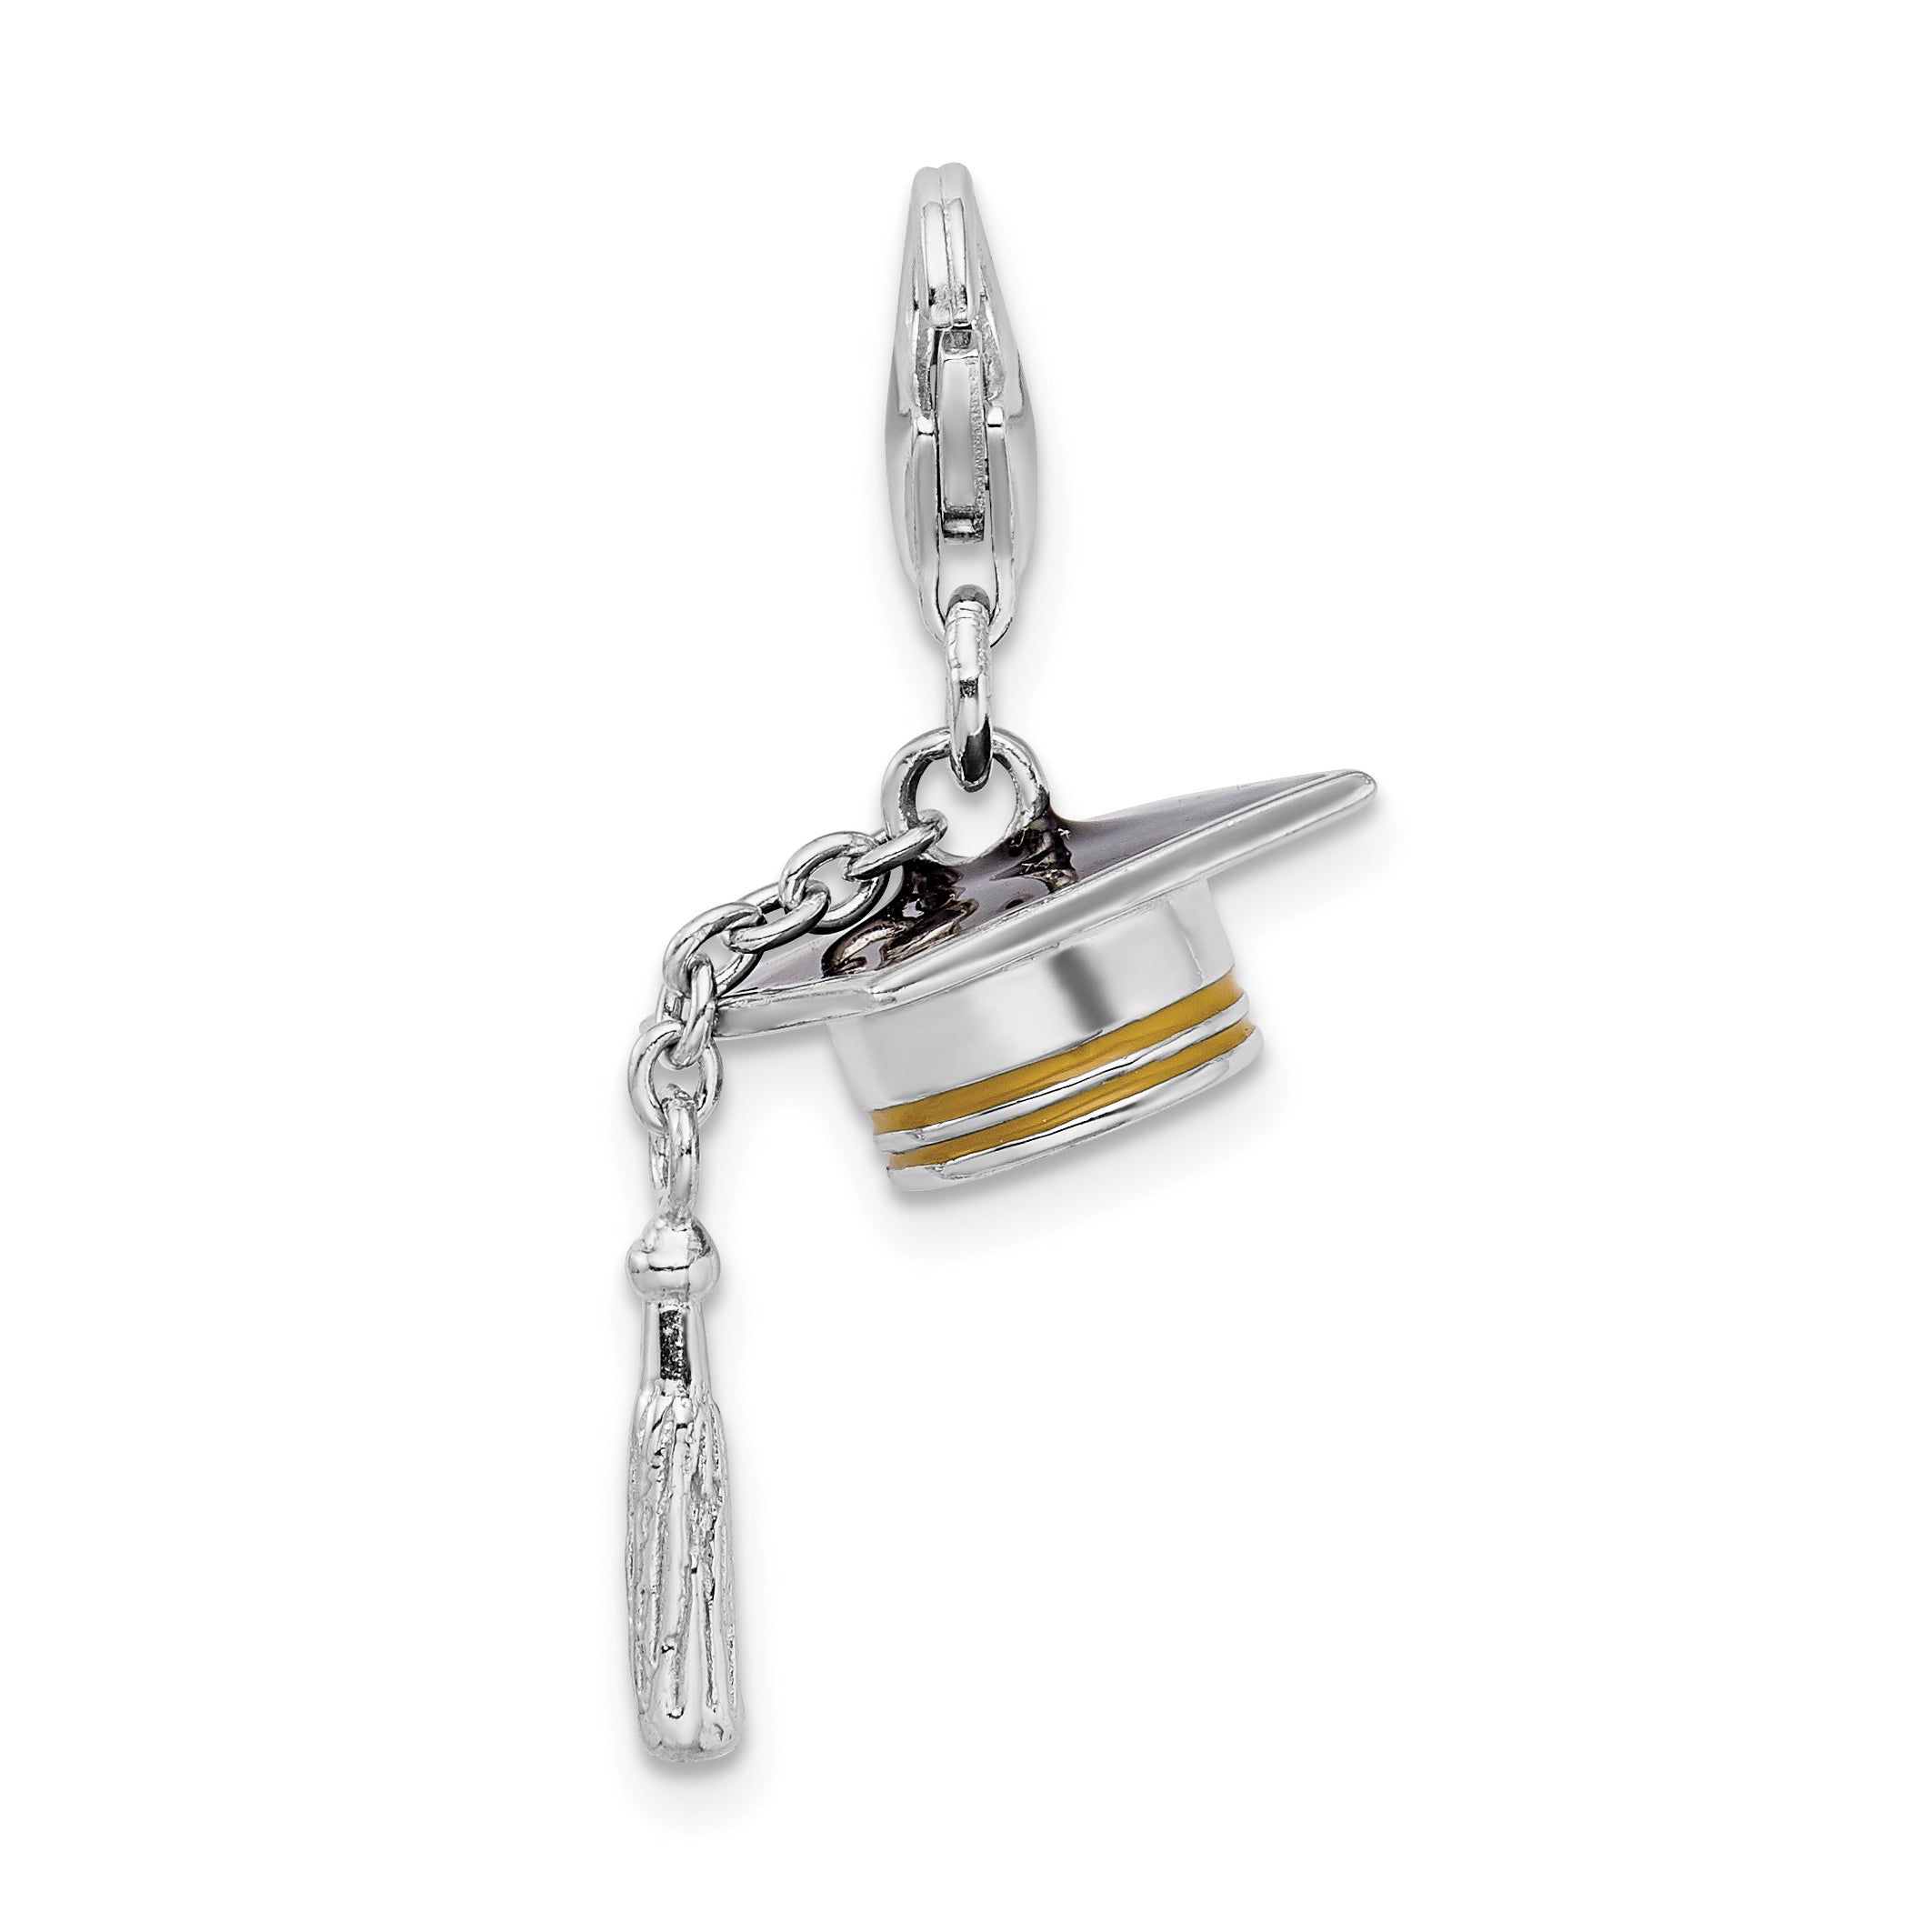 Amore La Vita Sterling Silver Rhodium-plated and Gold-tone Polished 3-D Moveable Enameled Graduation Cap and Tassel Charm with Fancy Lobster Clasp